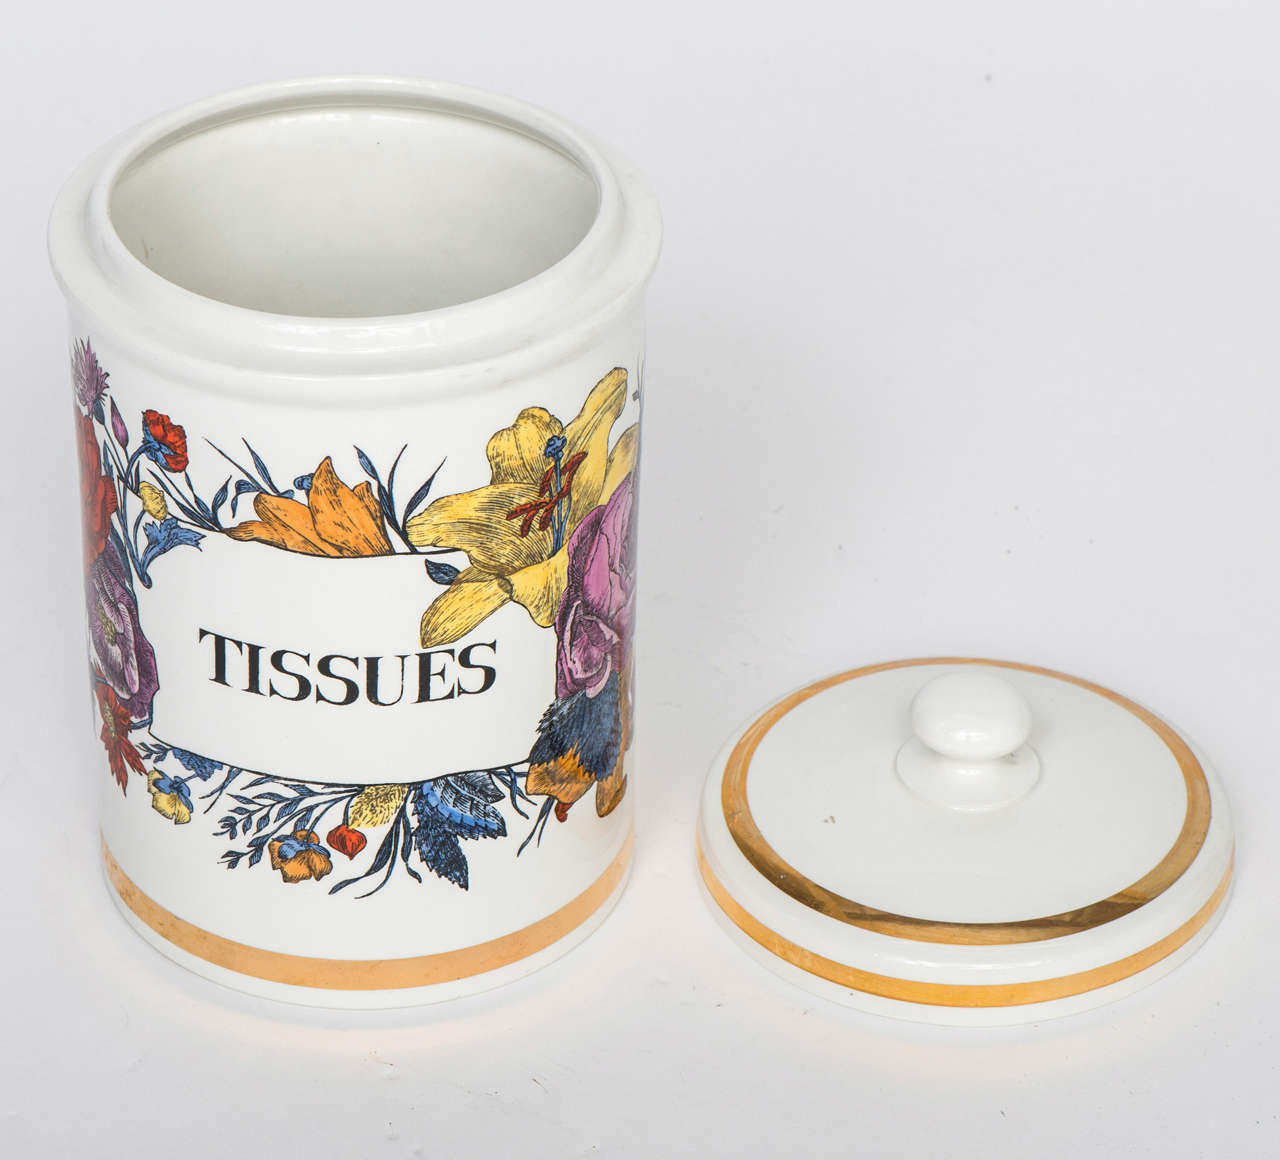 A Porcelain “Tissues” Jar and Cover by Piero Fornasetti.
Labelled against decorative Flora.
Lithographically printed and hand coloured
Gilt highlights
Label to base
Italy
Circa 1960
30cms h x 18cms diameter.